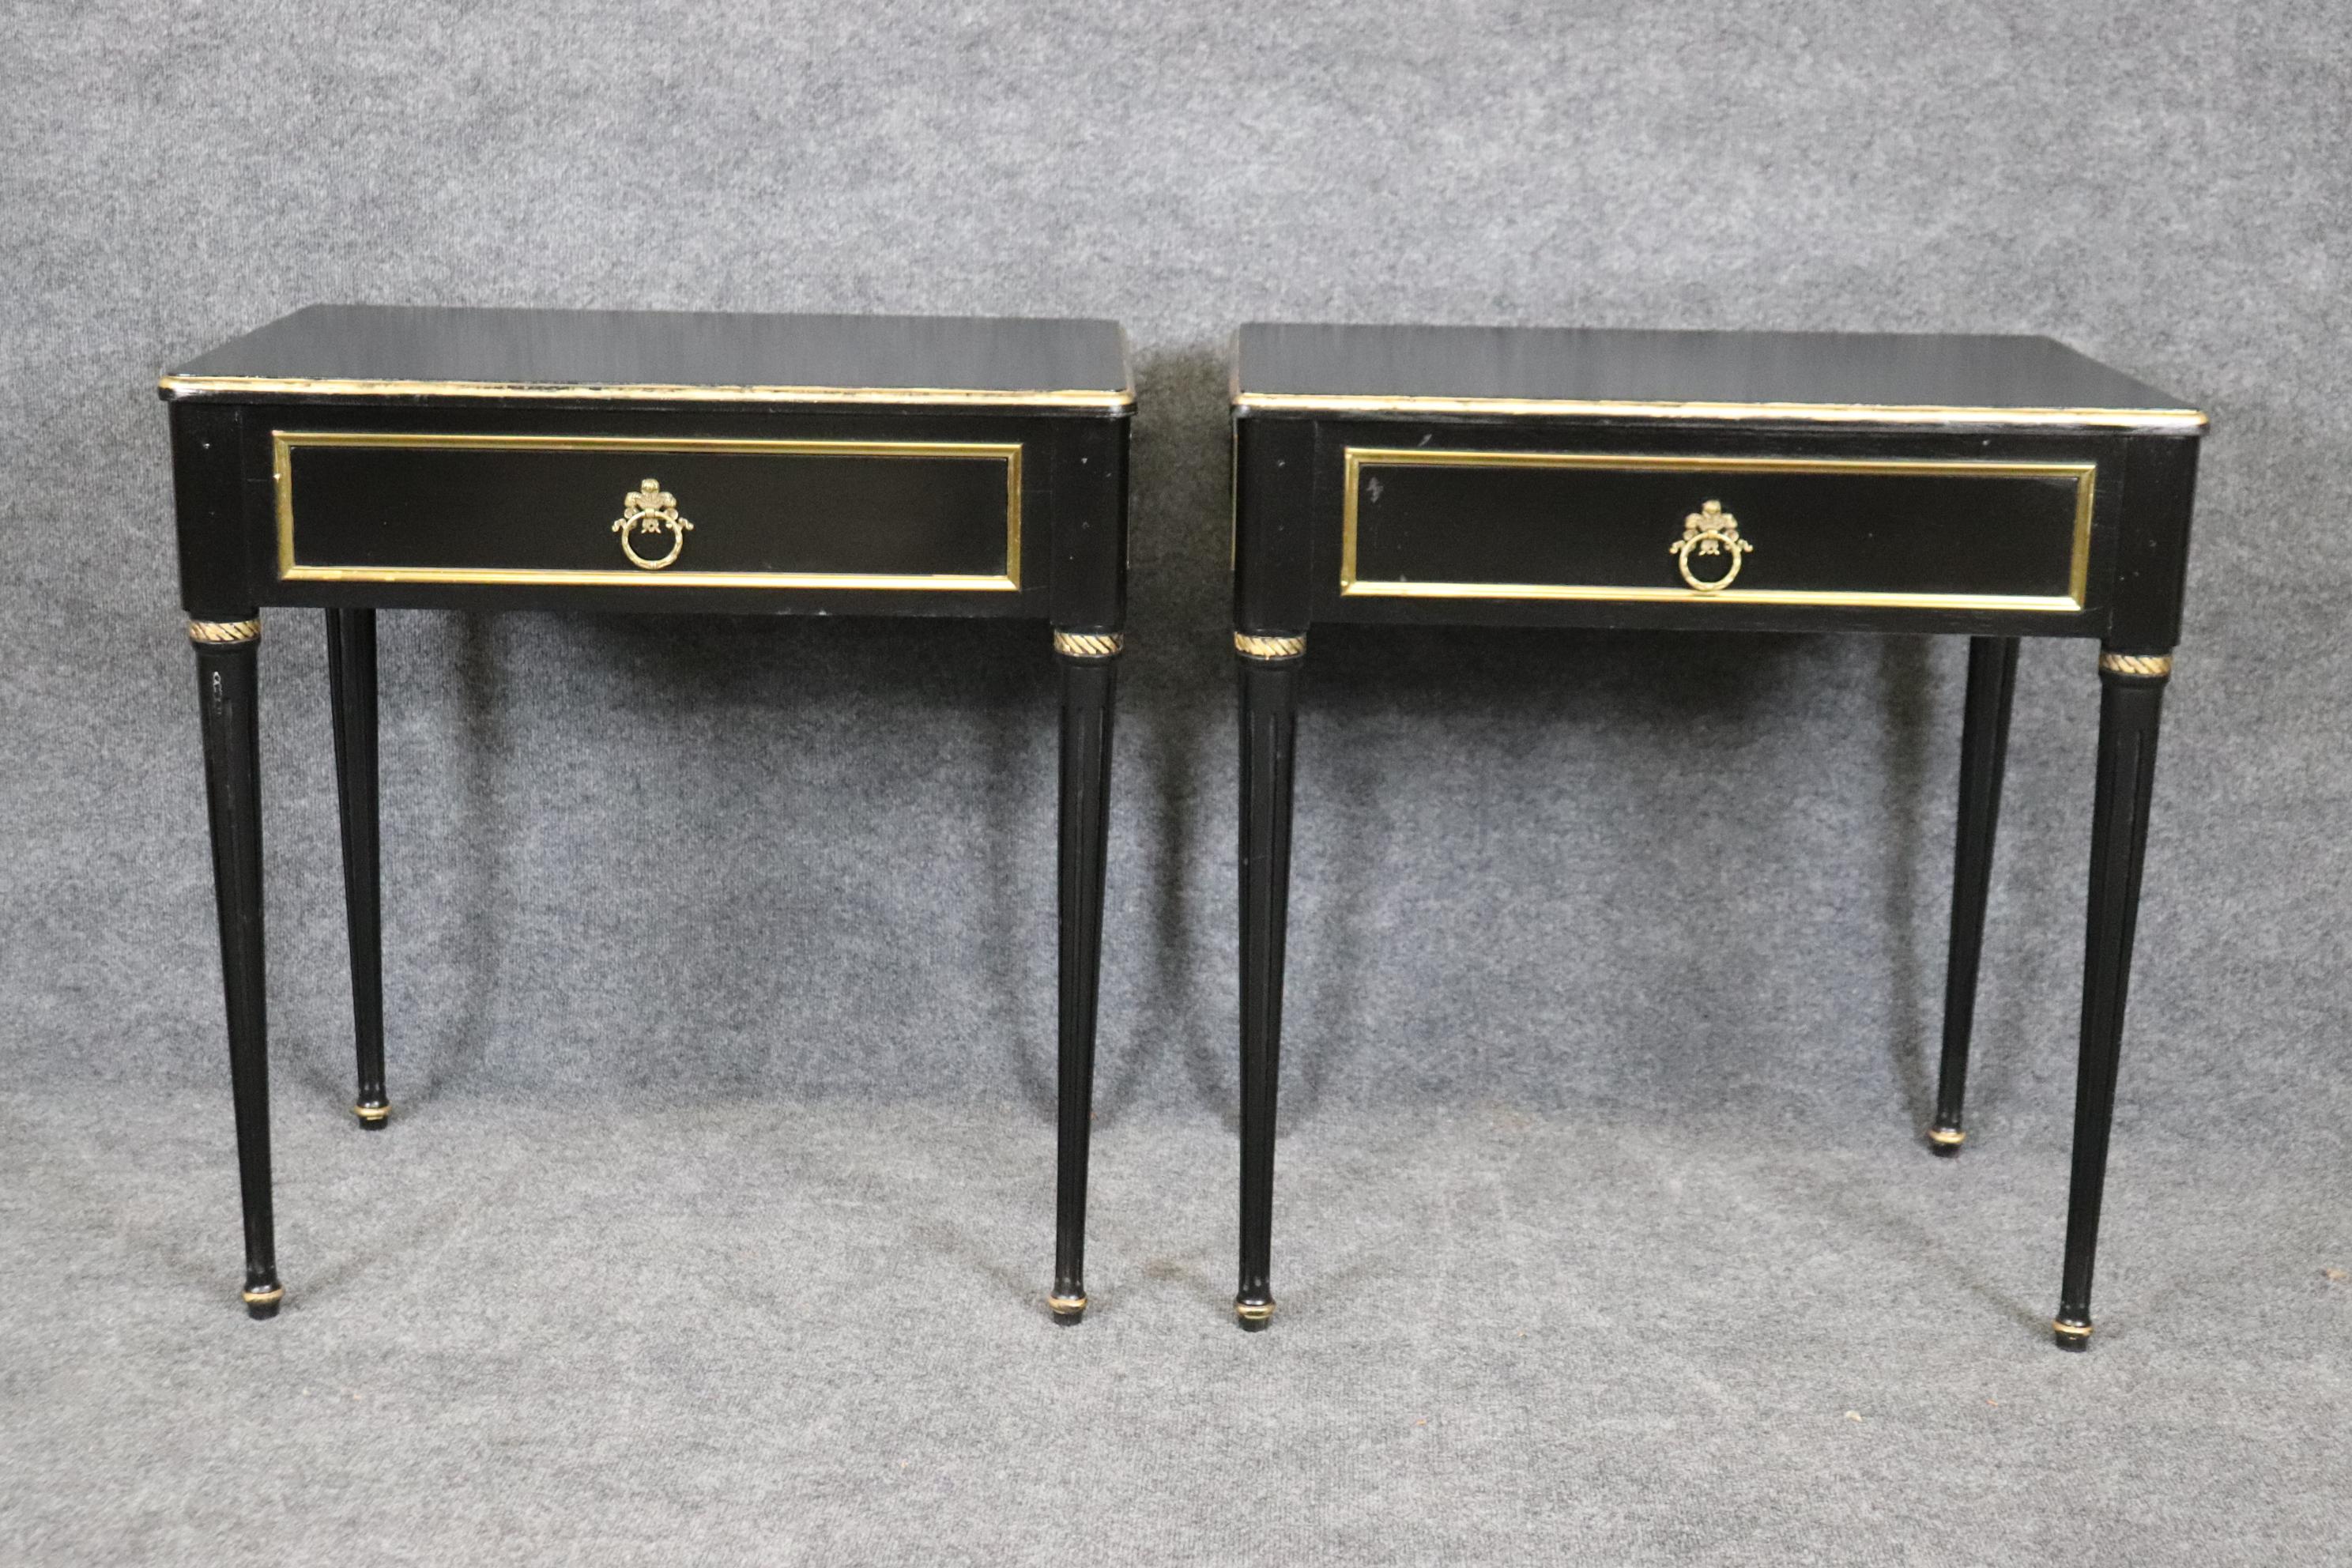 Pair of Maison Jansen Style Ebonized Gilded Brass Trimmed End Tables 1